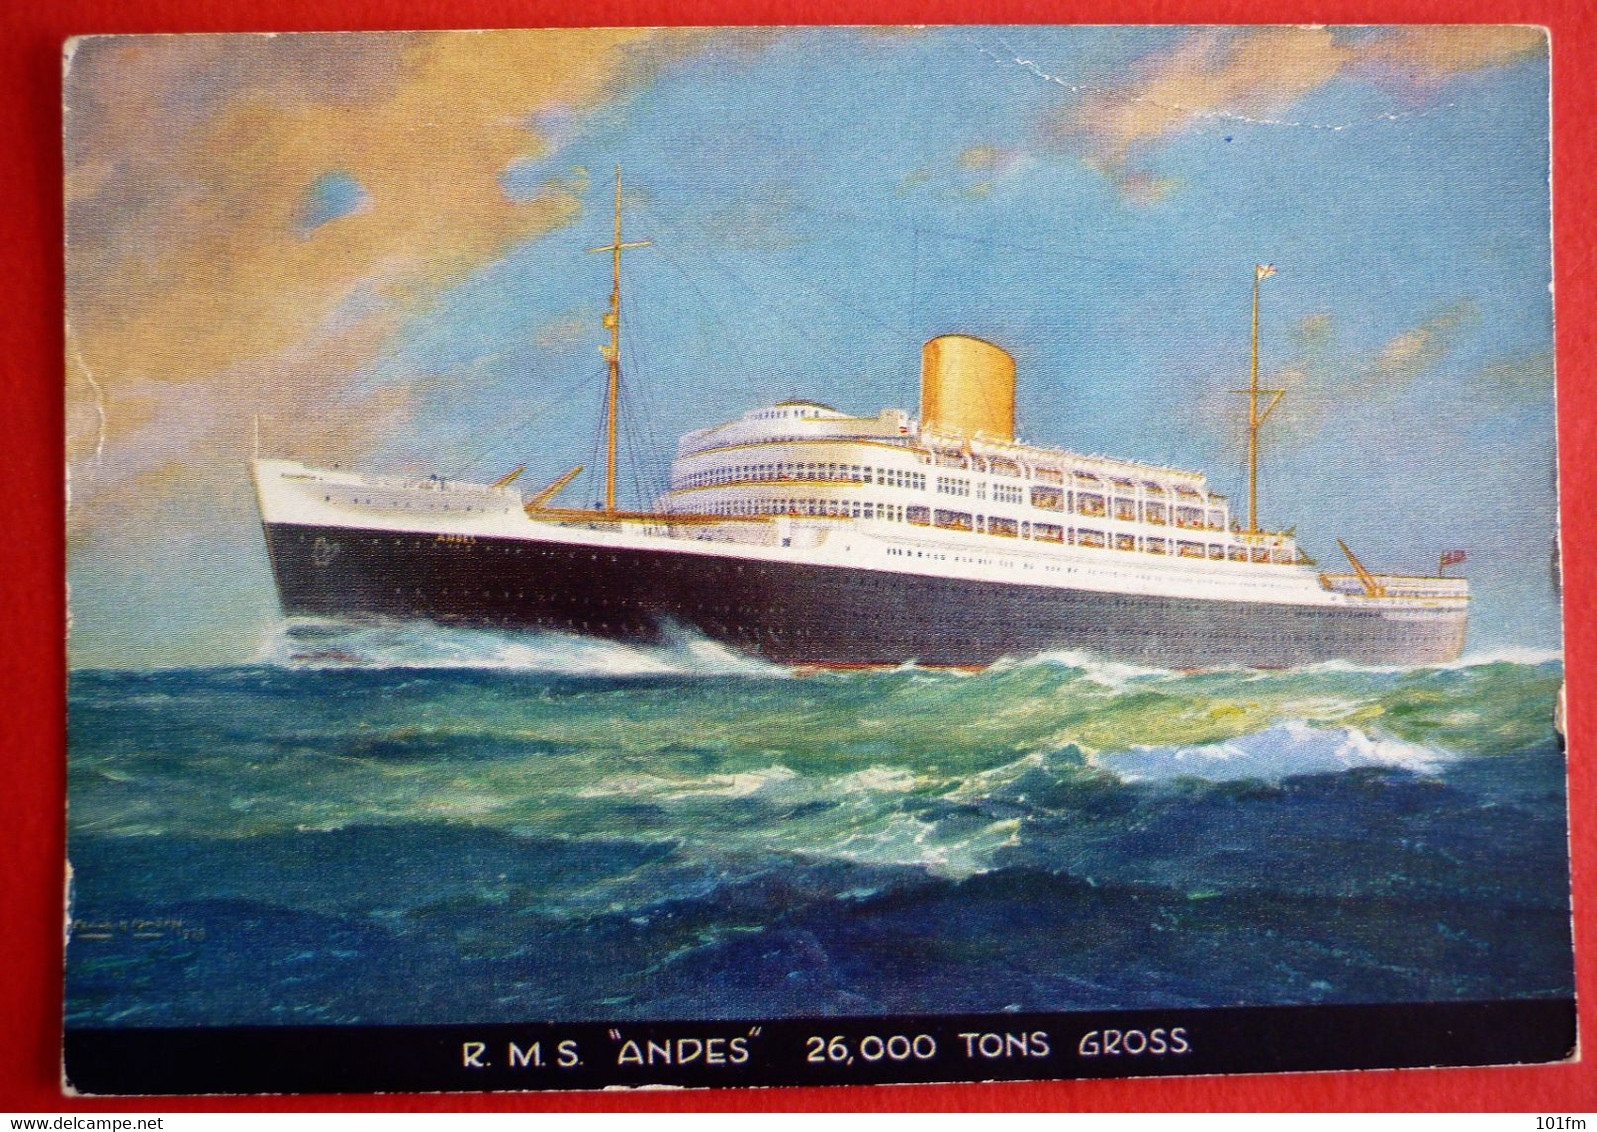 R.M.S. "ANDES" ROYAL MAIL LINES, LTD. - Steamers